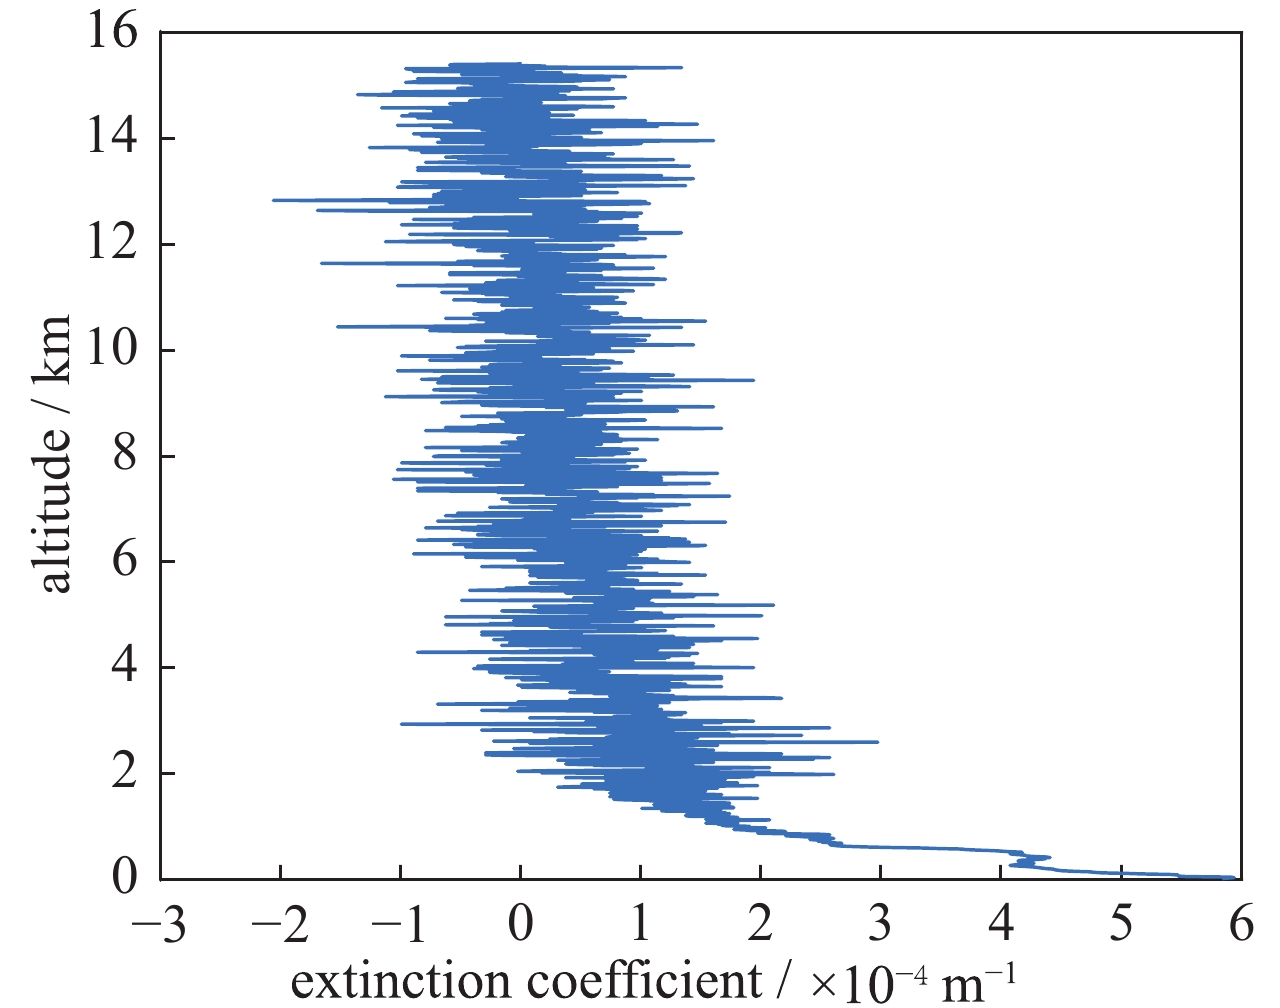 Atmospheric extinction coefficient profile at 00:00 on May 2, 2019